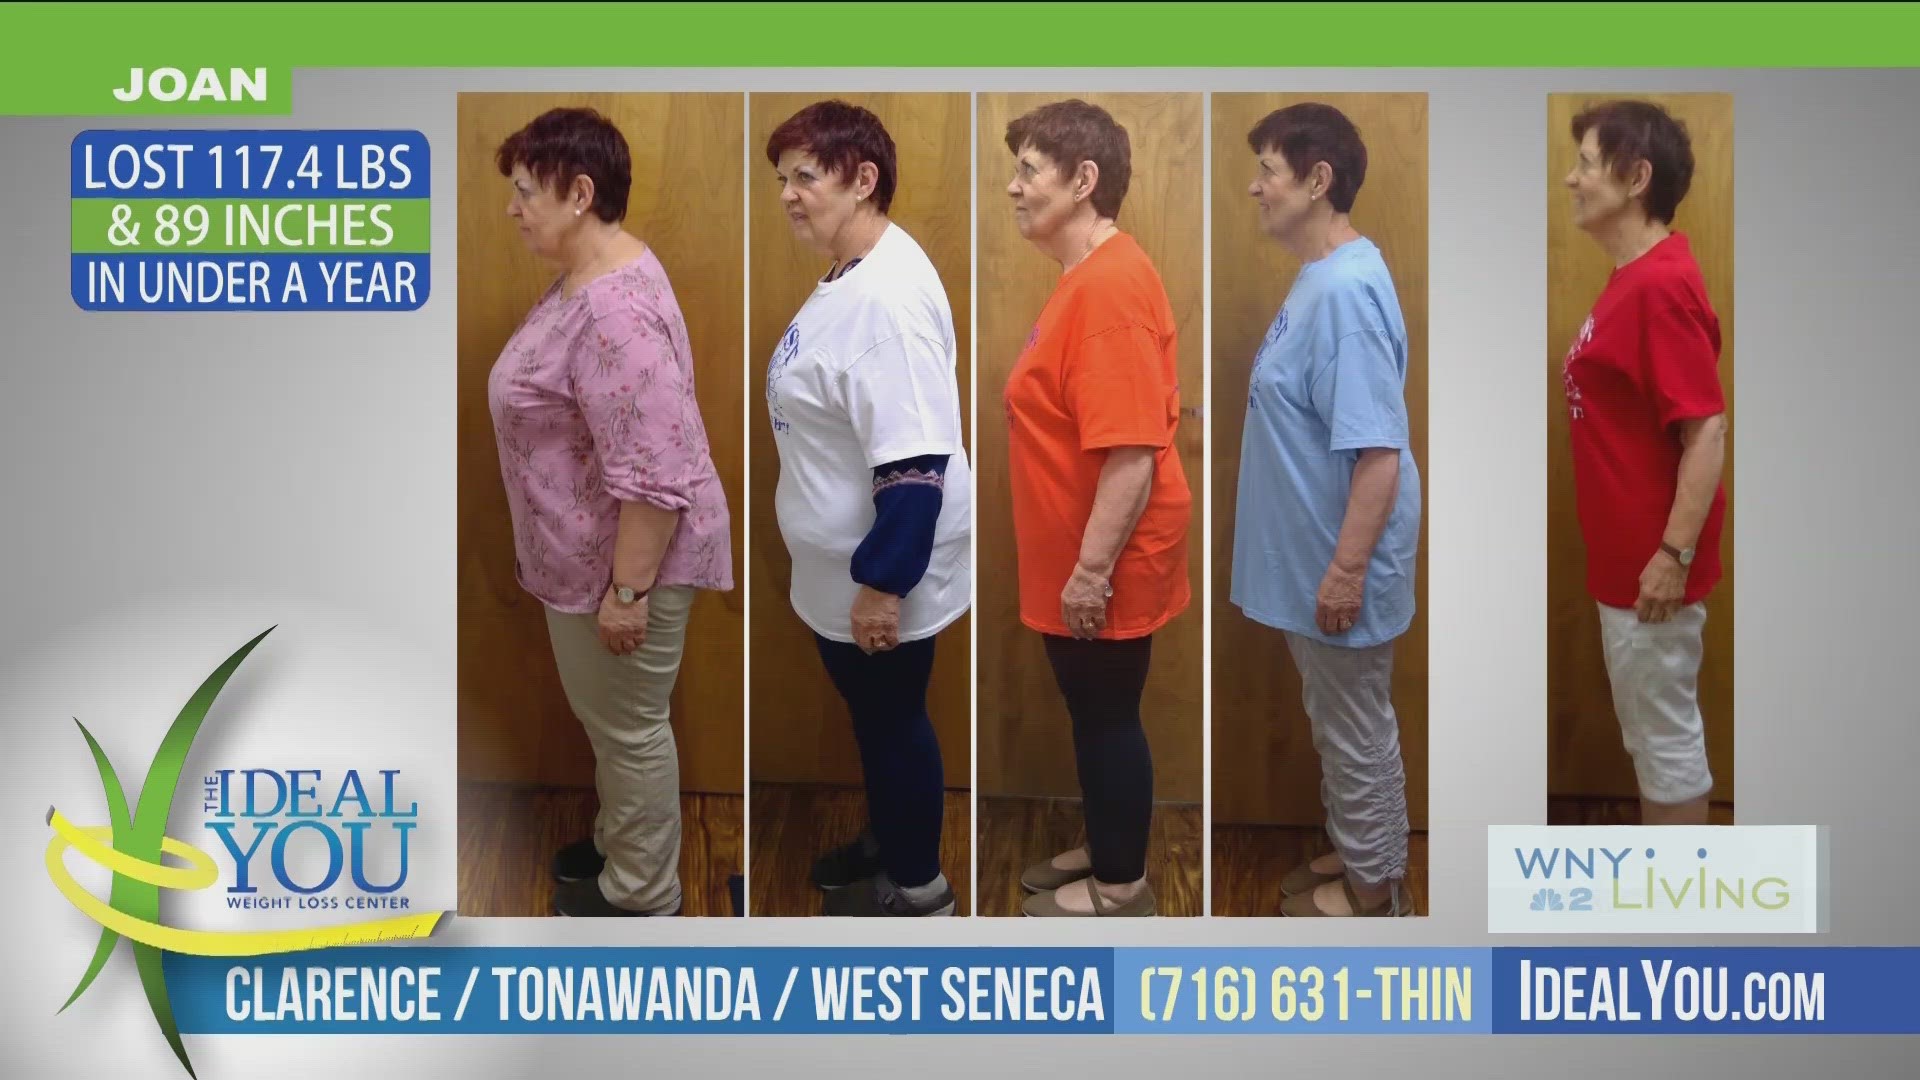 May 6th - WNY Living - The Ideal You Weight Loss Center (THIS VIDEO IS SPONSORED BY IDEAL YOU WEIGHT LOSS CENTER)